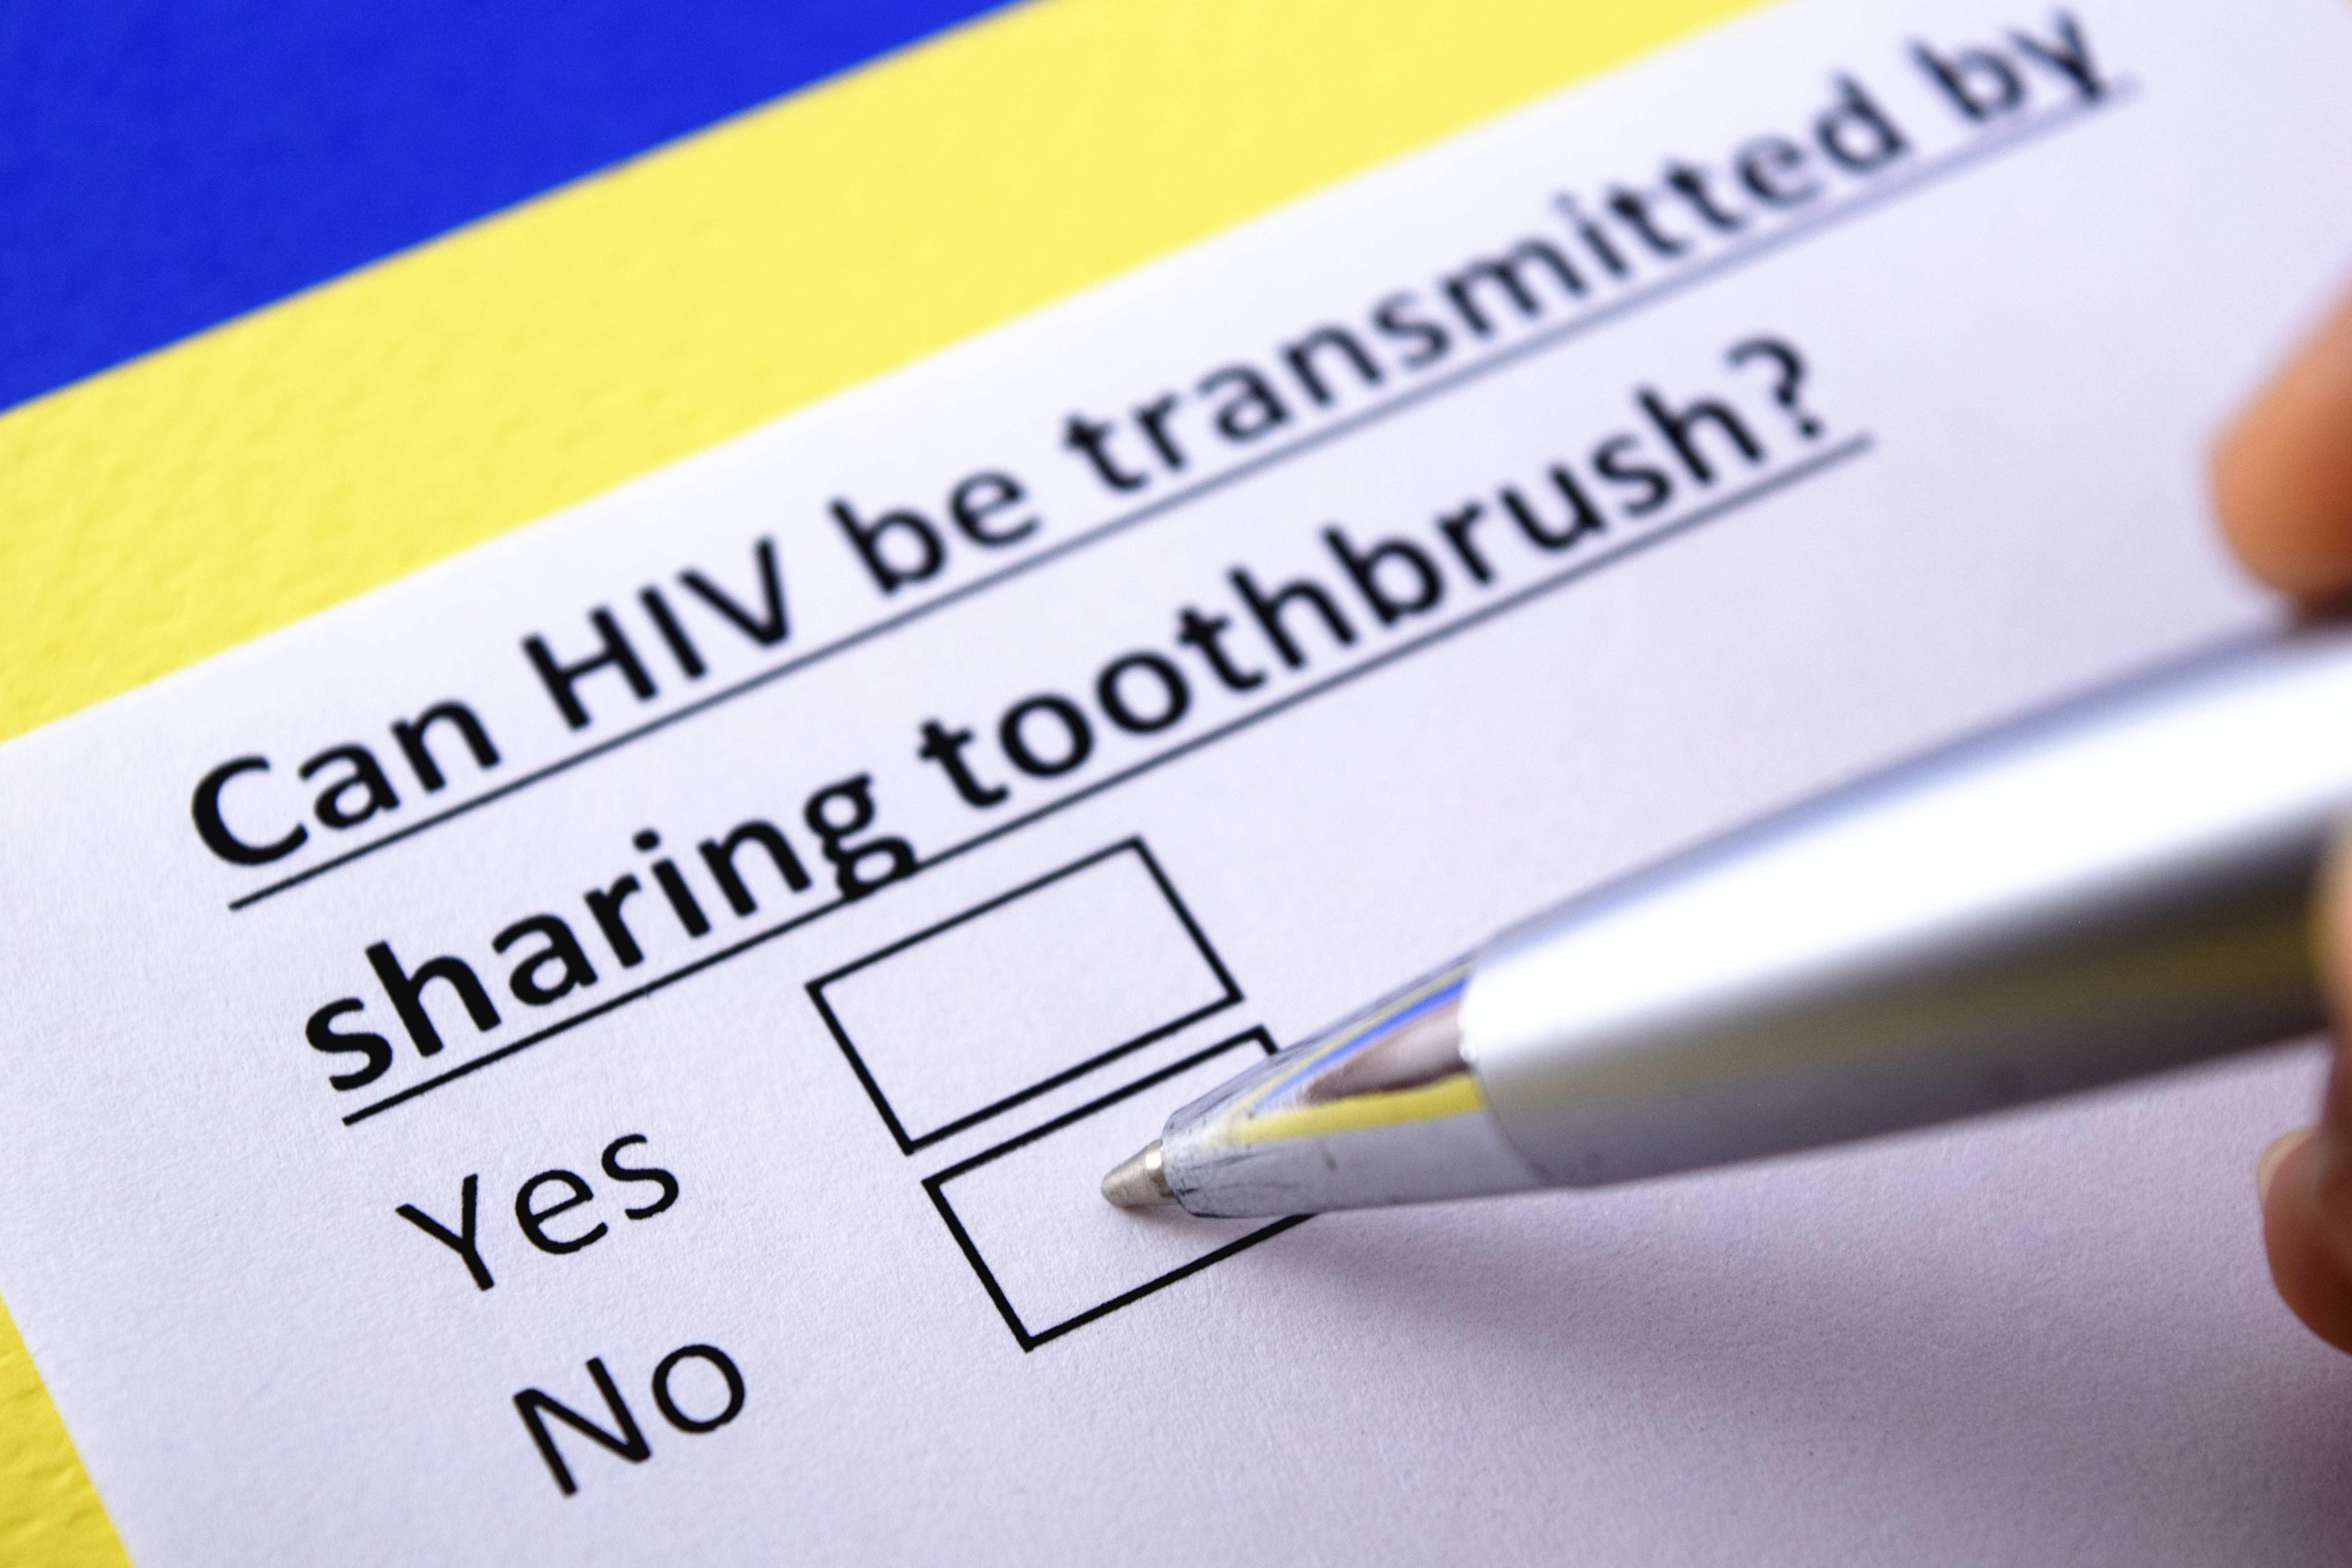 HIV Transmission: How it Spreads and How to Prevent it